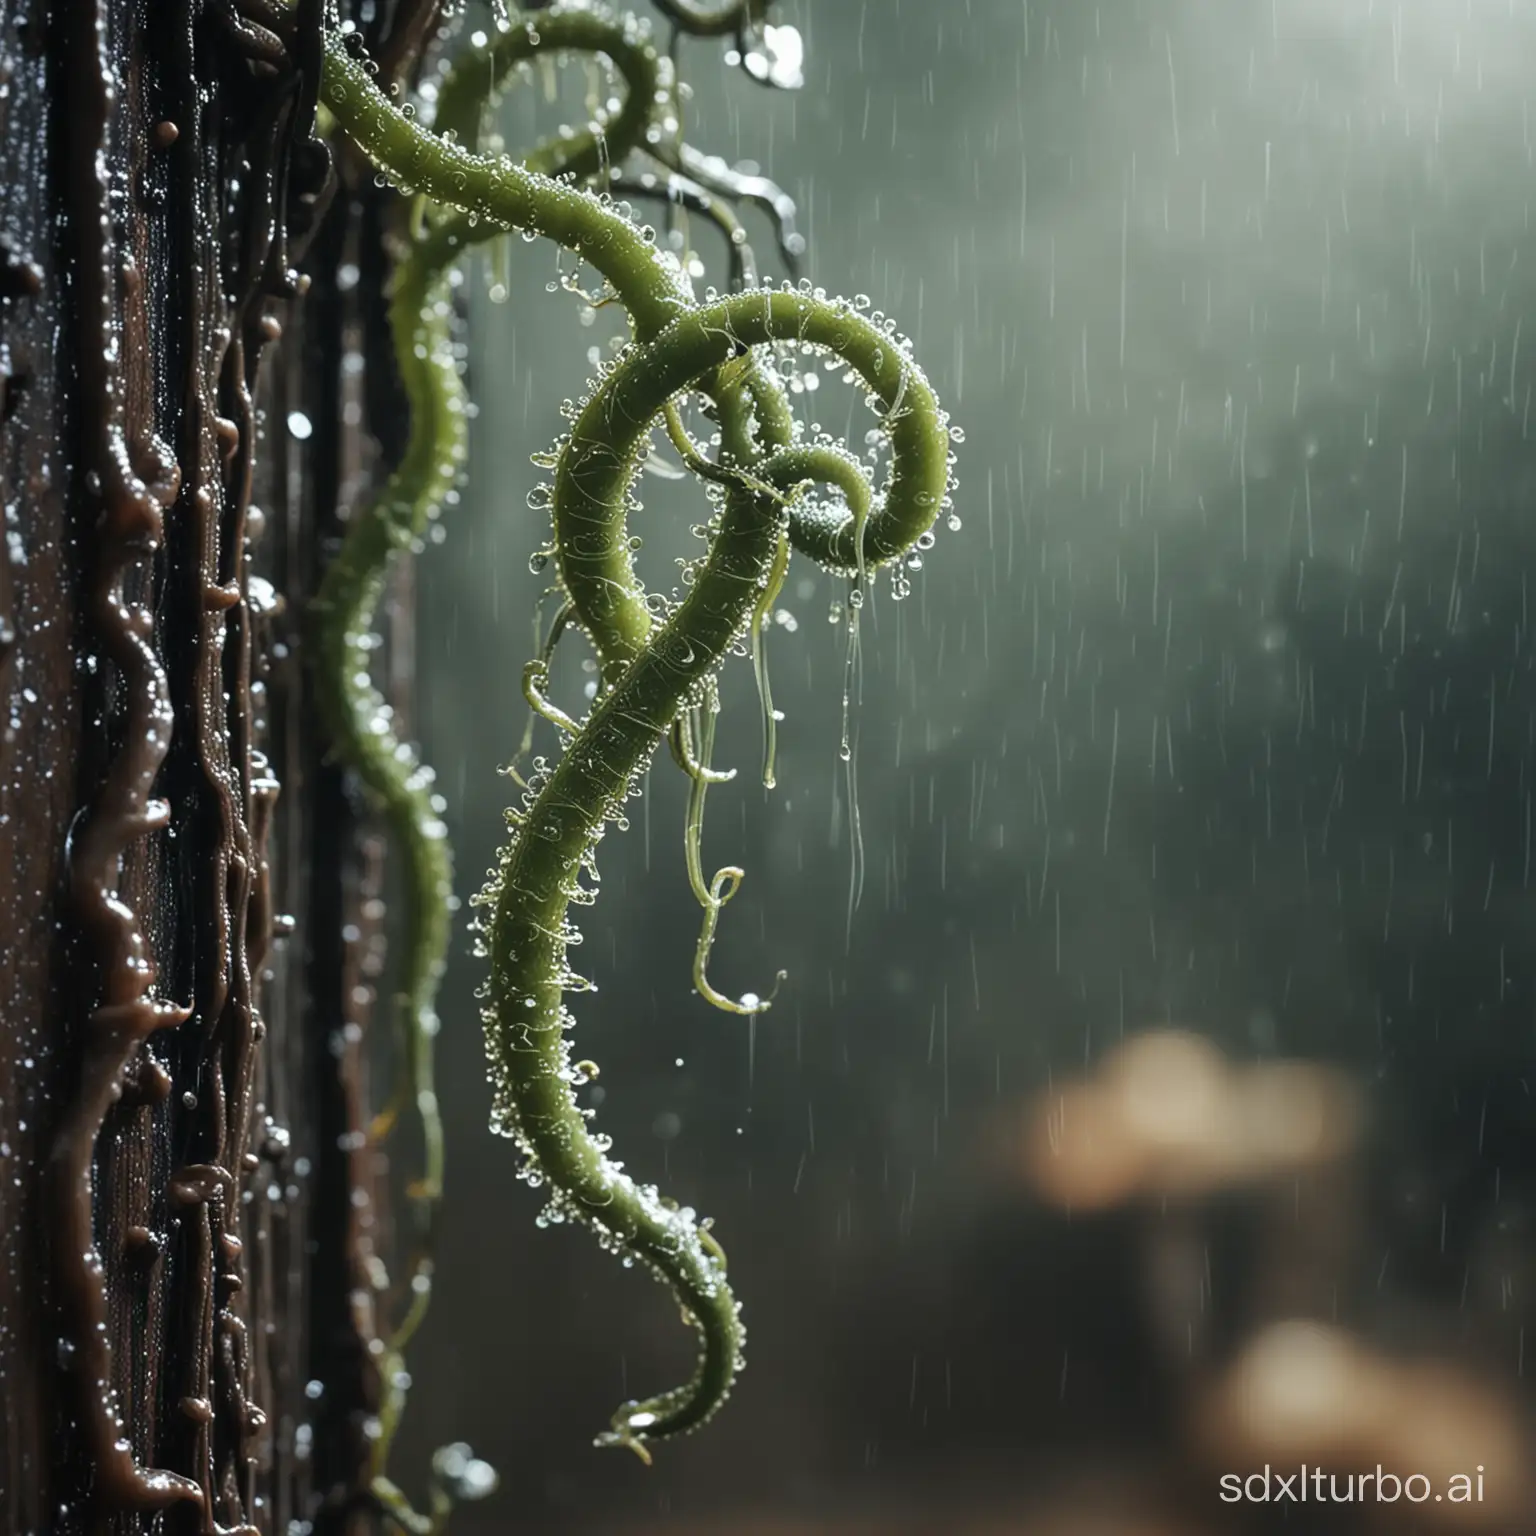 close up on a glistening sinister tendril wiggling in the wet post-apoc interior, shallow depth of focus